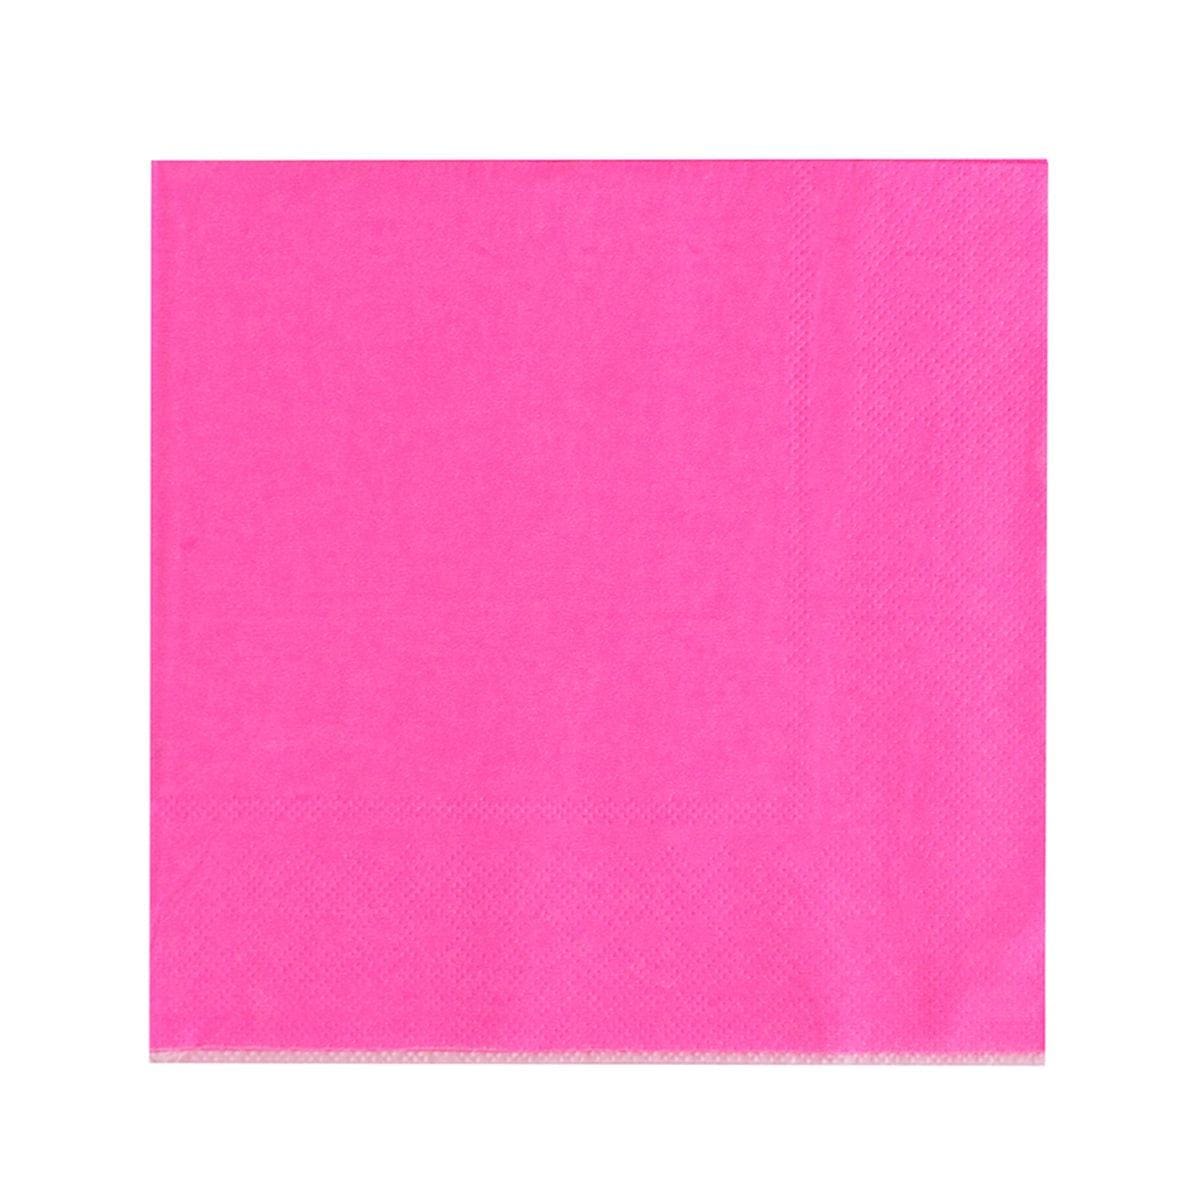 YIWU SANDY PAPER PRODUCTS CO., LTD Everyday Entertaining Hot Pink Lunch Napkins, 16 Count